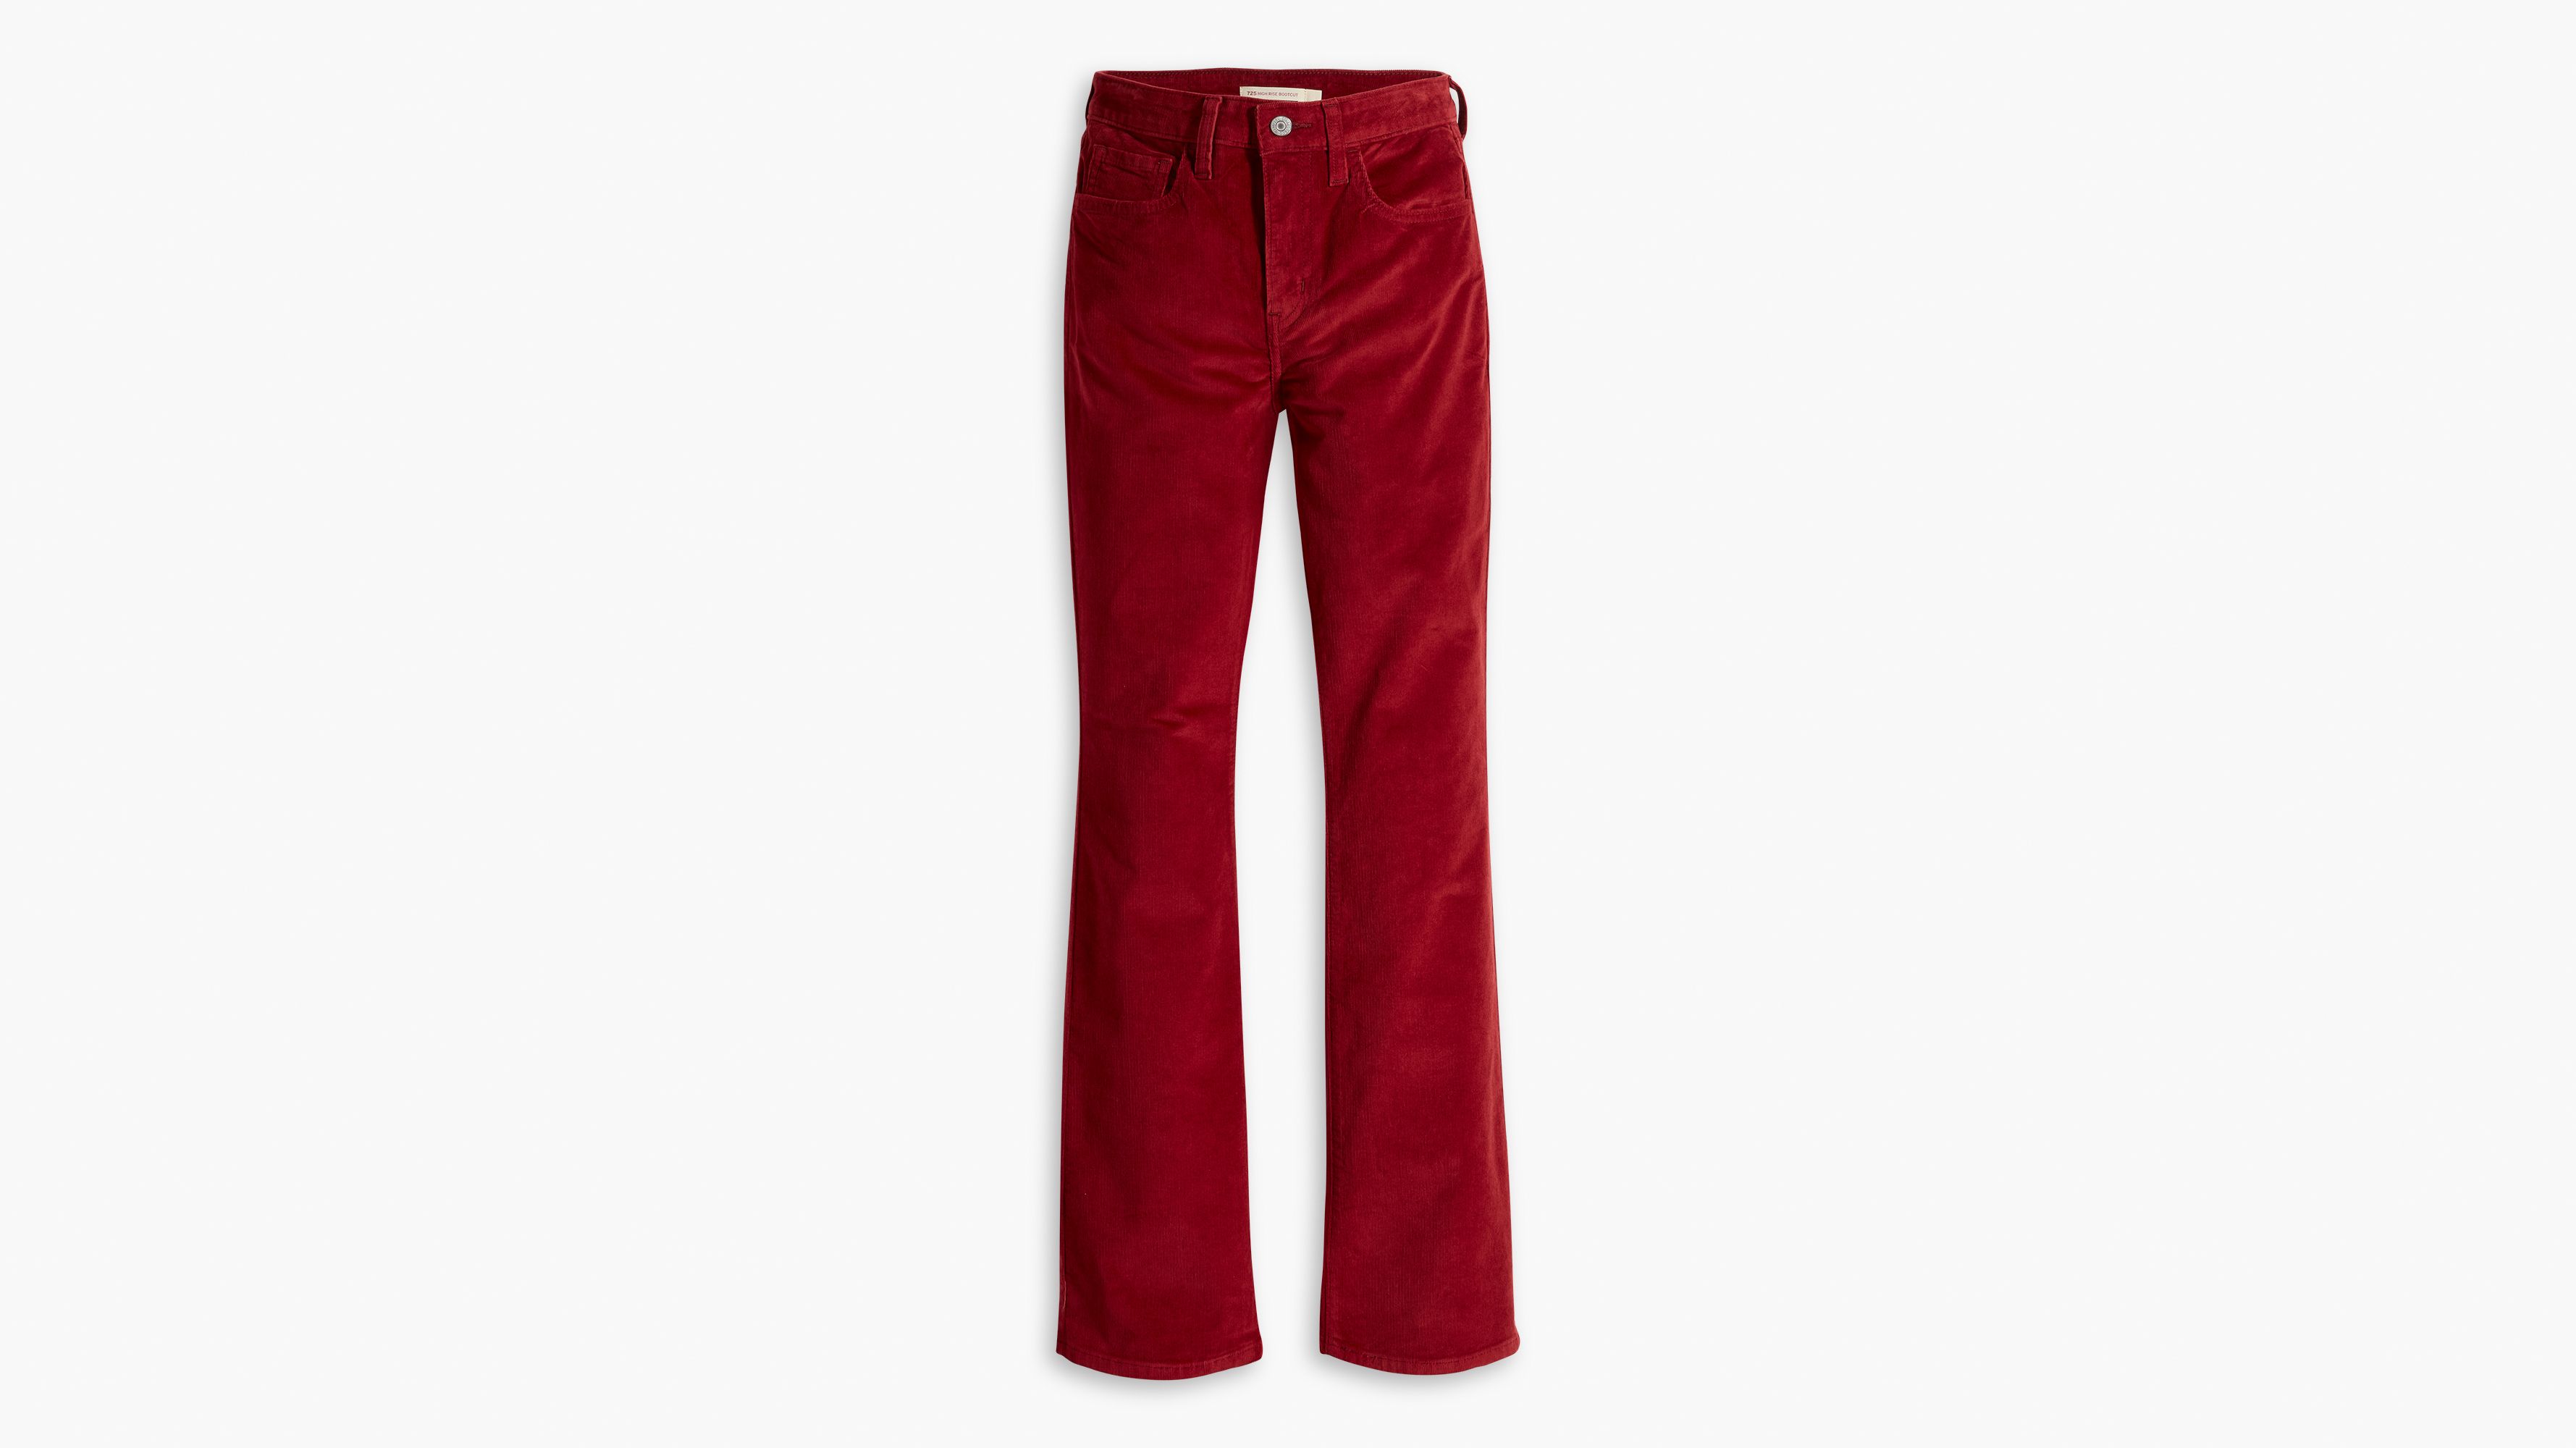 Time and Tru Women's Red Corduroy Cargo Pants Ladies Size 14. New With Tag